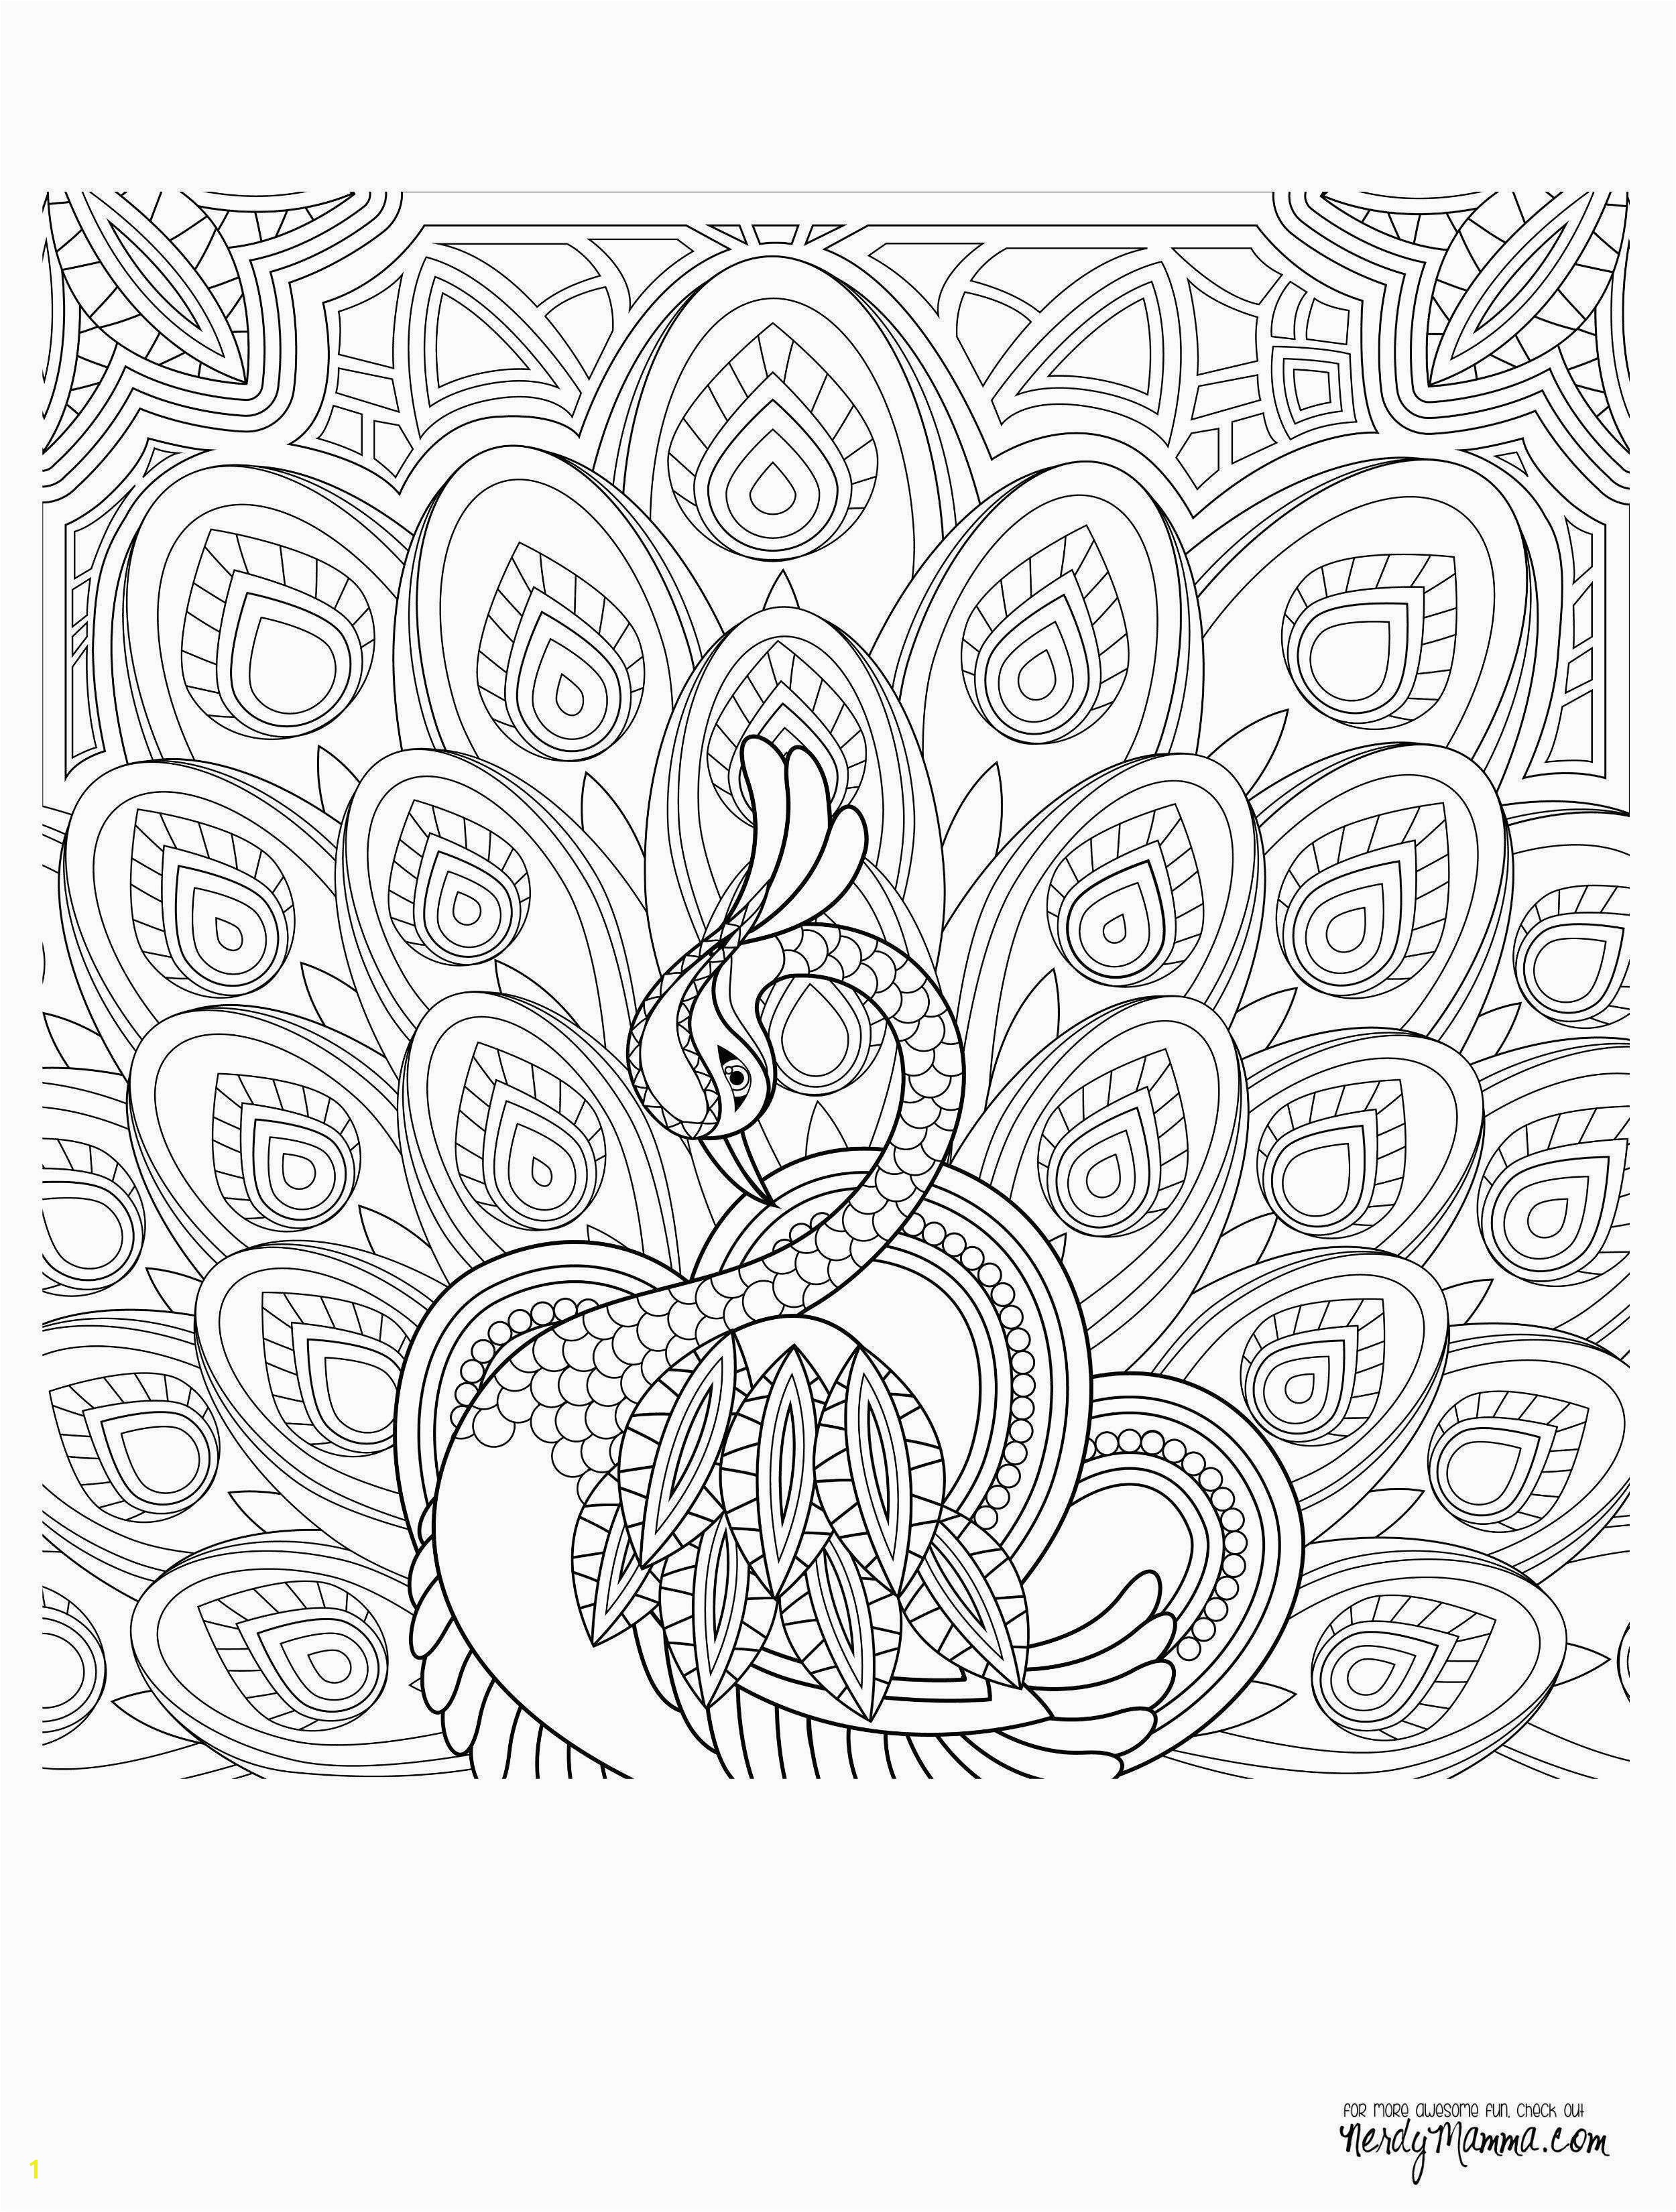 Stream Coloring Page 49 the Princess and Pauper Download